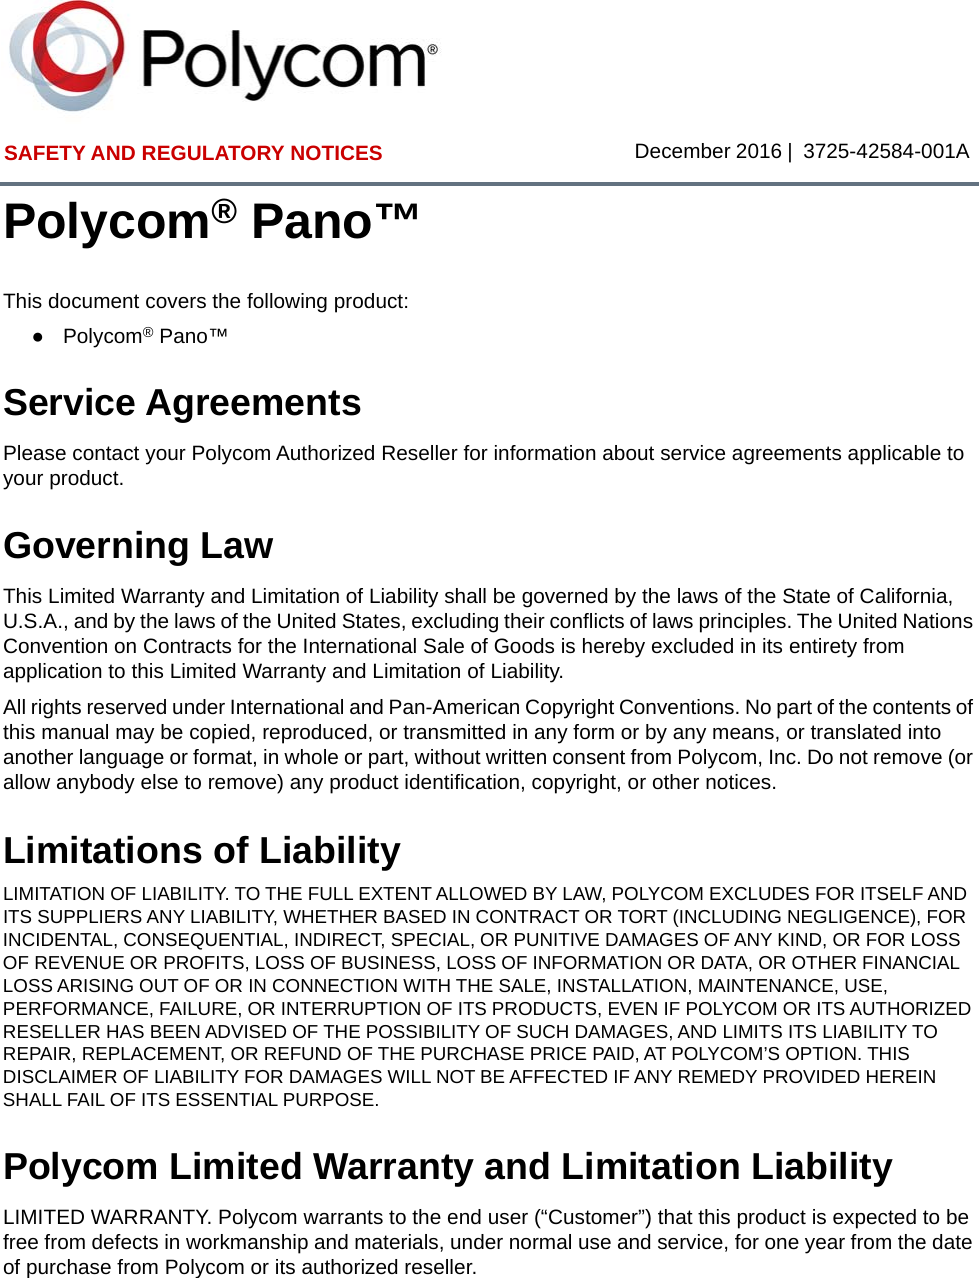 SAFETY AND REGULATORY NOTICES December 2016 | 3725-42584-001APolycom® Pano™This document covers the following product:●Polycom® Pano™Service AgreementsPlease contact your Polycom Authorized Reseller for information about service agreements applicable to your product.Governing LawThis Limited Warranty and Limitation of Liability shall be governed by the laws of the State of California, U.S.A., and by the laws of the United States, excluding their conflicts of laws principles. The United Nations Convention on Contracts for the International Sale of Goods is hereby excluded in its entirety from application to this Limited Warranty and Limitation of Liability. All rights reserved under International and Pan-American Copyright Conventions. No part of the contents of this manual may be copied, reproduced, or transmitted in any form or by any means, or translated into another language or format, in whole or part, without written consent from Polycom, Inc. Do not remove (or allow anybody else to remove) any product identification, copyright, or other notices.Limitations of LiabilityLIMITATION OF LIABILITY. TO THE FULL EXTENT ALLOWED BY LAW, POLYCOM EXCLUDES FOR ITSELF AND ITS SUPPLIERS ANY LIABILITY, WHETHER BASED IN CONTRACT OR TORT (INCLUDING NEGLIGENCE), FOR INCIDENTAL, CONSEQUENTIAL, INDIRECT, SPECIAL, OR PUNITIVE DAMAGES OF ANY KIND, OR FOR LOSS OF REVENUE OR PROFITS, LOSS OF BUSINESS, LOSS OF INFORMATION OR DATA, OR OTHER FINANCIAL LOSS ARISING OUT OF OR IN CONNECTION WITH THE SALE, INSTALLATION, MAINTENANCE, USE, PERFORMANCE, FAILURE, OR INTERRUPTION OF ITS PRODUCTS, EVEN IF POLYCOM OR ITS AUTHORIZED RESELLER HAS BEEN ADVISED OF THE POSSIBILITY OF SUCH DAMAGES, AND LIMITS ITS LIABILITY TO REPAIR, REPLACEMENT, OR REFUND OF THE PURCHASE PRICE PAID, AT POLYCOM’S OPTION. THIS DISCLAIMER OF LIABILITY FOR DAMAGES WILL NOT BE AFFECTED IF ANY REMEDY PROVIDED HEREIN SHALL FAIL OF ITS ESSENTIAL PURPOSE.Polycom Limited Warranty and Limitation LiabilityLIMITED WARRANTY. Polycom warrants to the end user (“Customer”) that this product is expected to be free from defects in workmanship and materials, under normal use and service, for one year from the date of purchase from Polycom or its authorized reseller. 